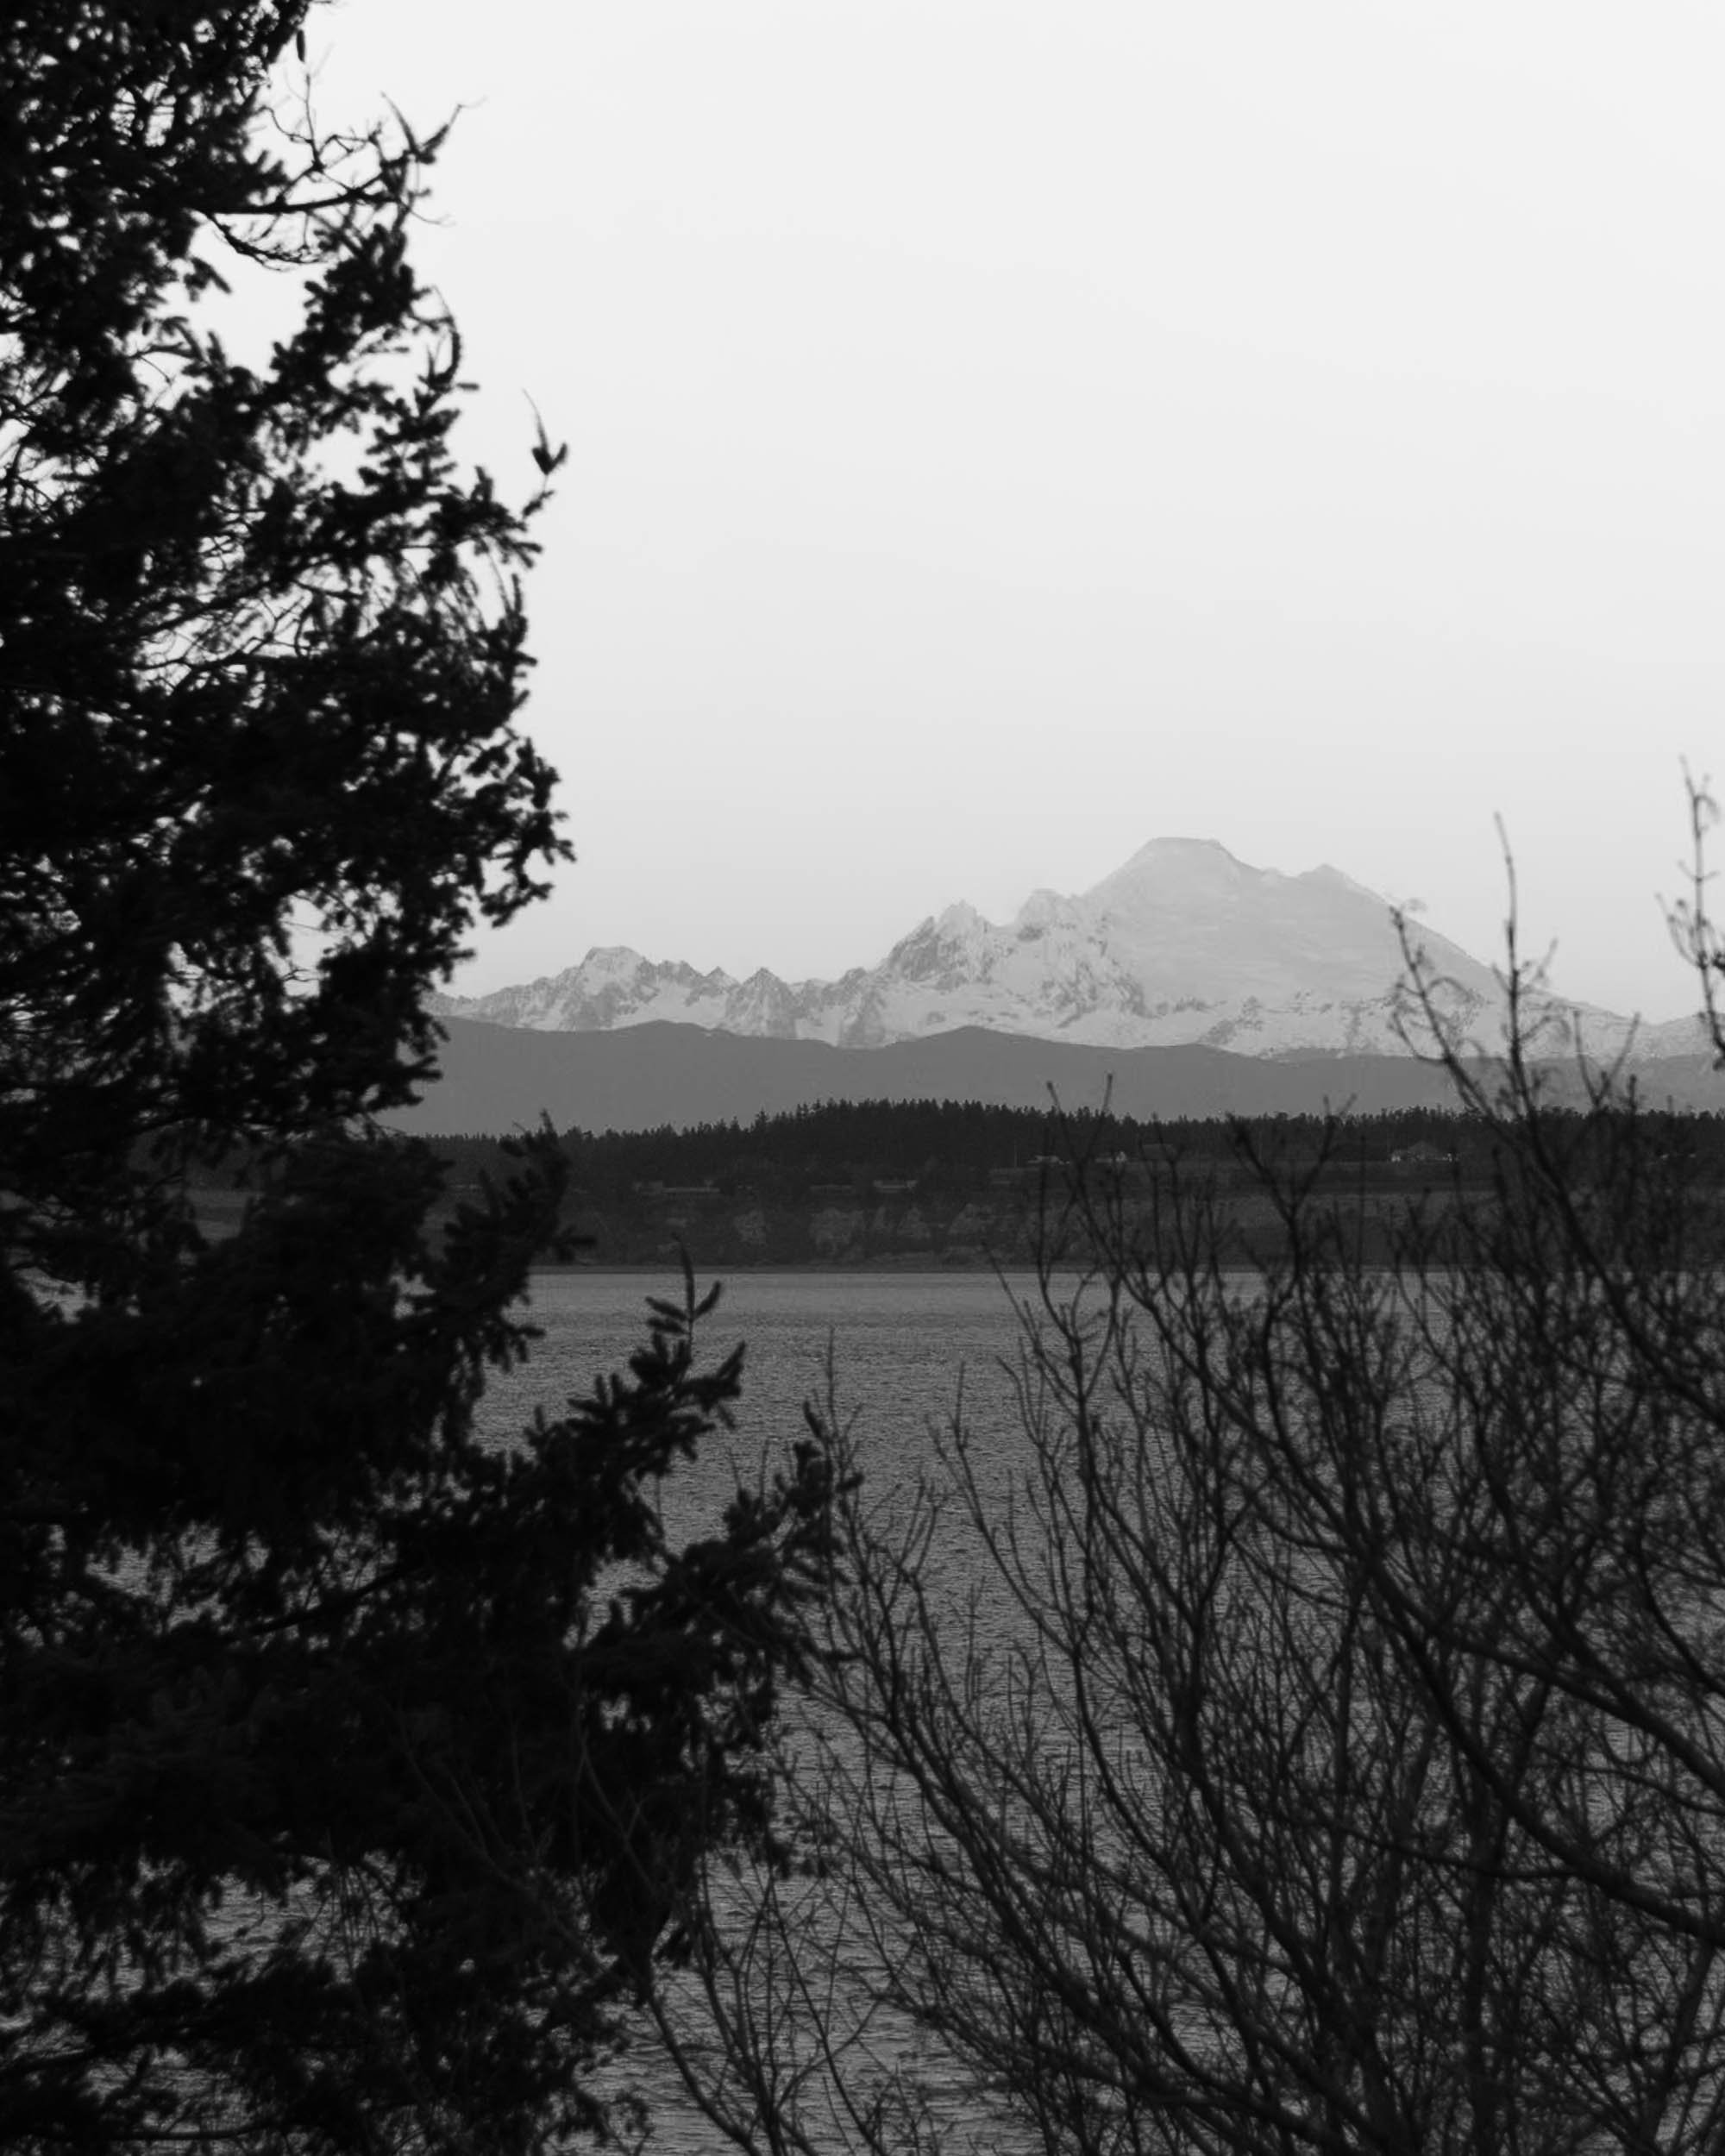 View of the Cascades from Fort Worden